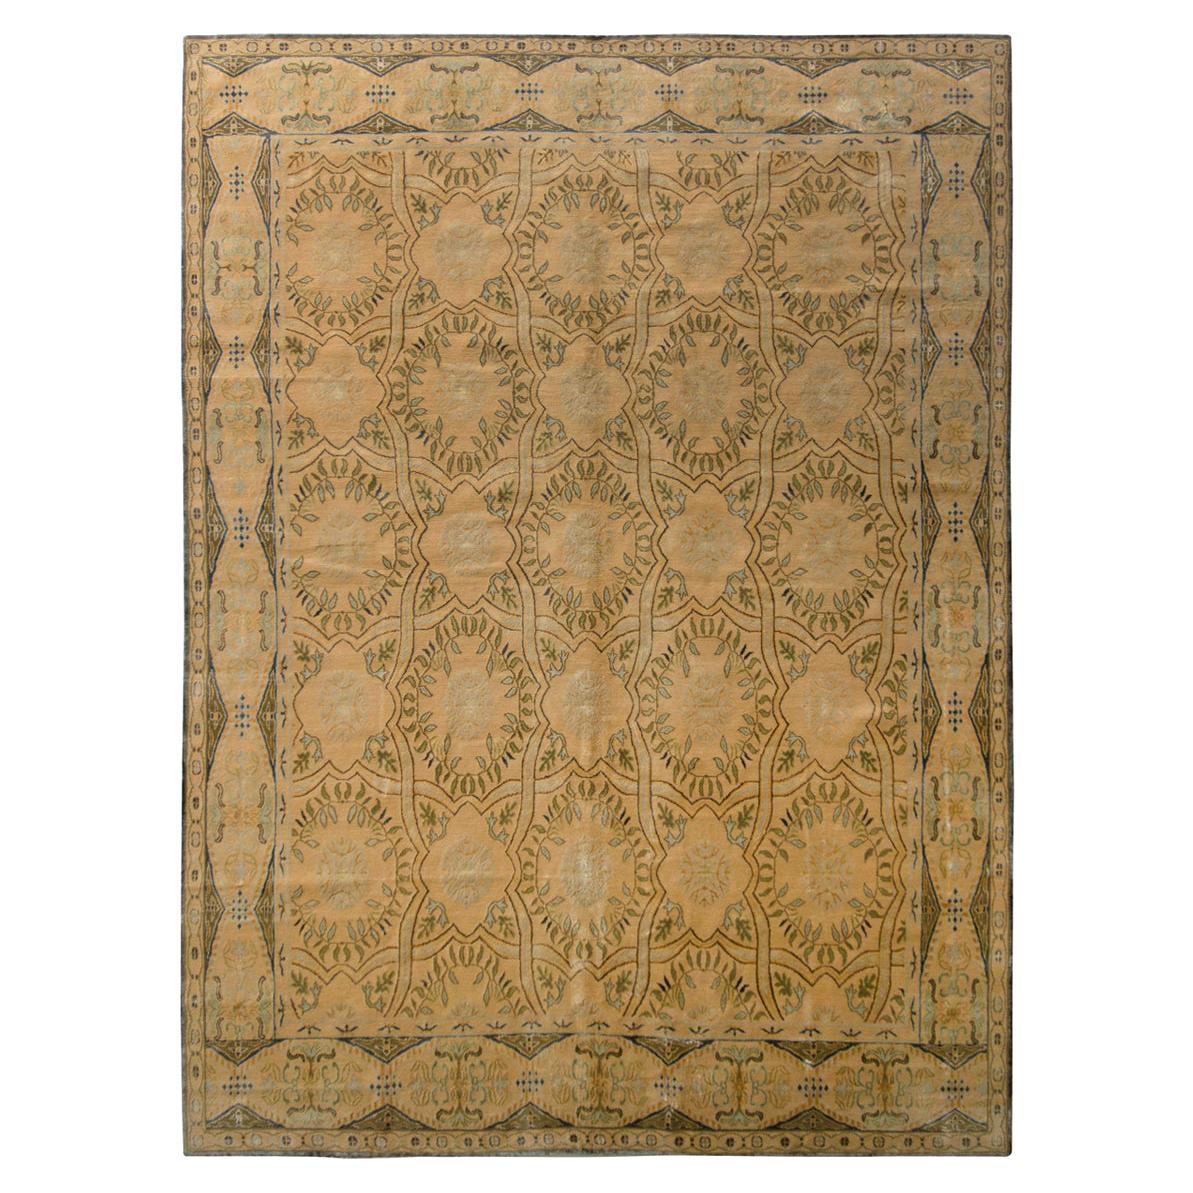 Rug & Kilim's Hand Knotted European Style Rug Beige Green Floral Trellis Pattern